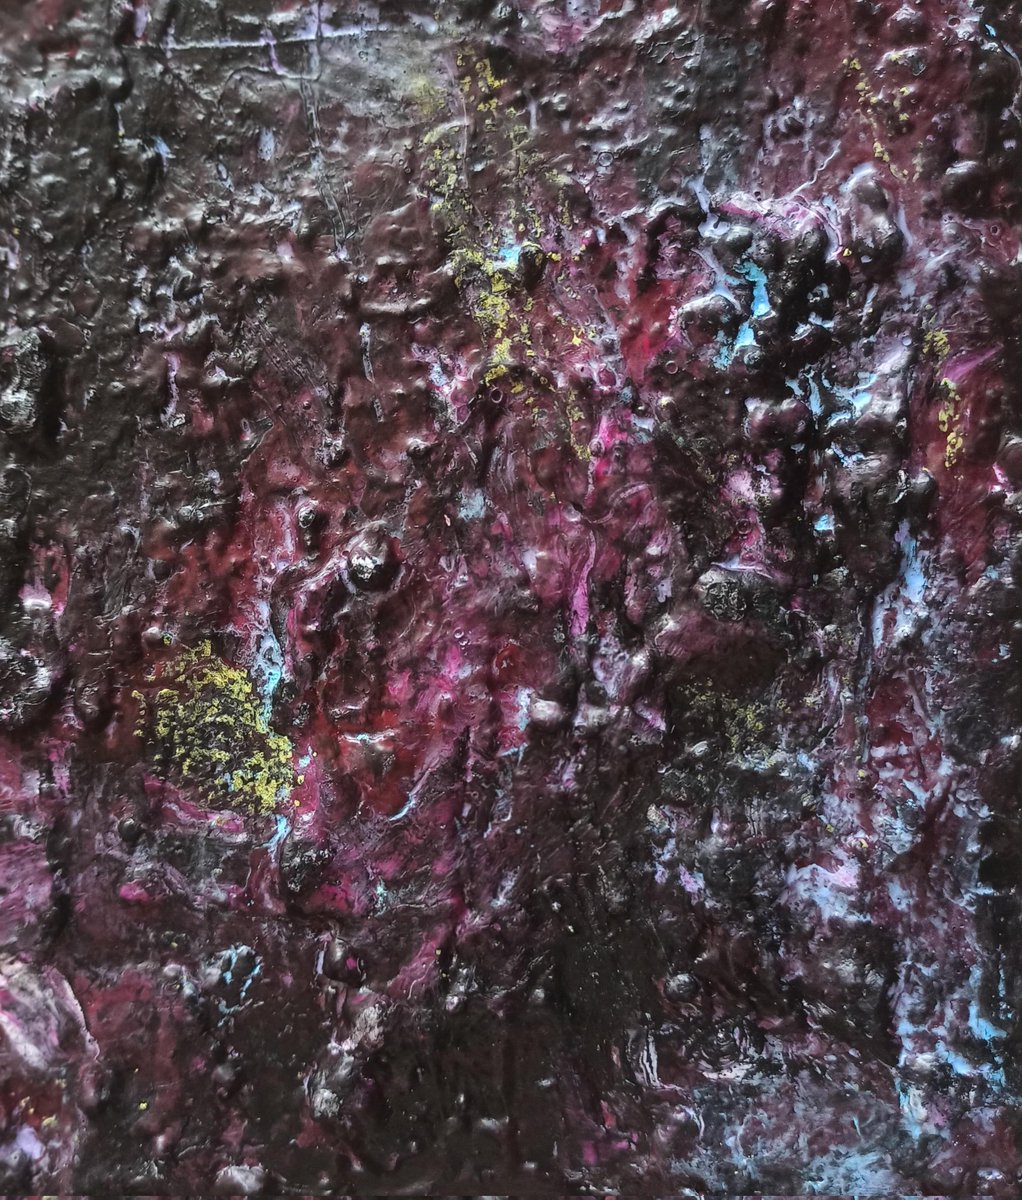 Gm 🌿 🫧Of all the pretty things from my childhood, bryophytes looked beautiful, the velvety ones. Wild and Free. In Wilderness, -in bare and in banal- the MUD mimics Manna. A-L-C-H-E-M-Y. Painting & Sculpture Mixed Media Studies, 2023